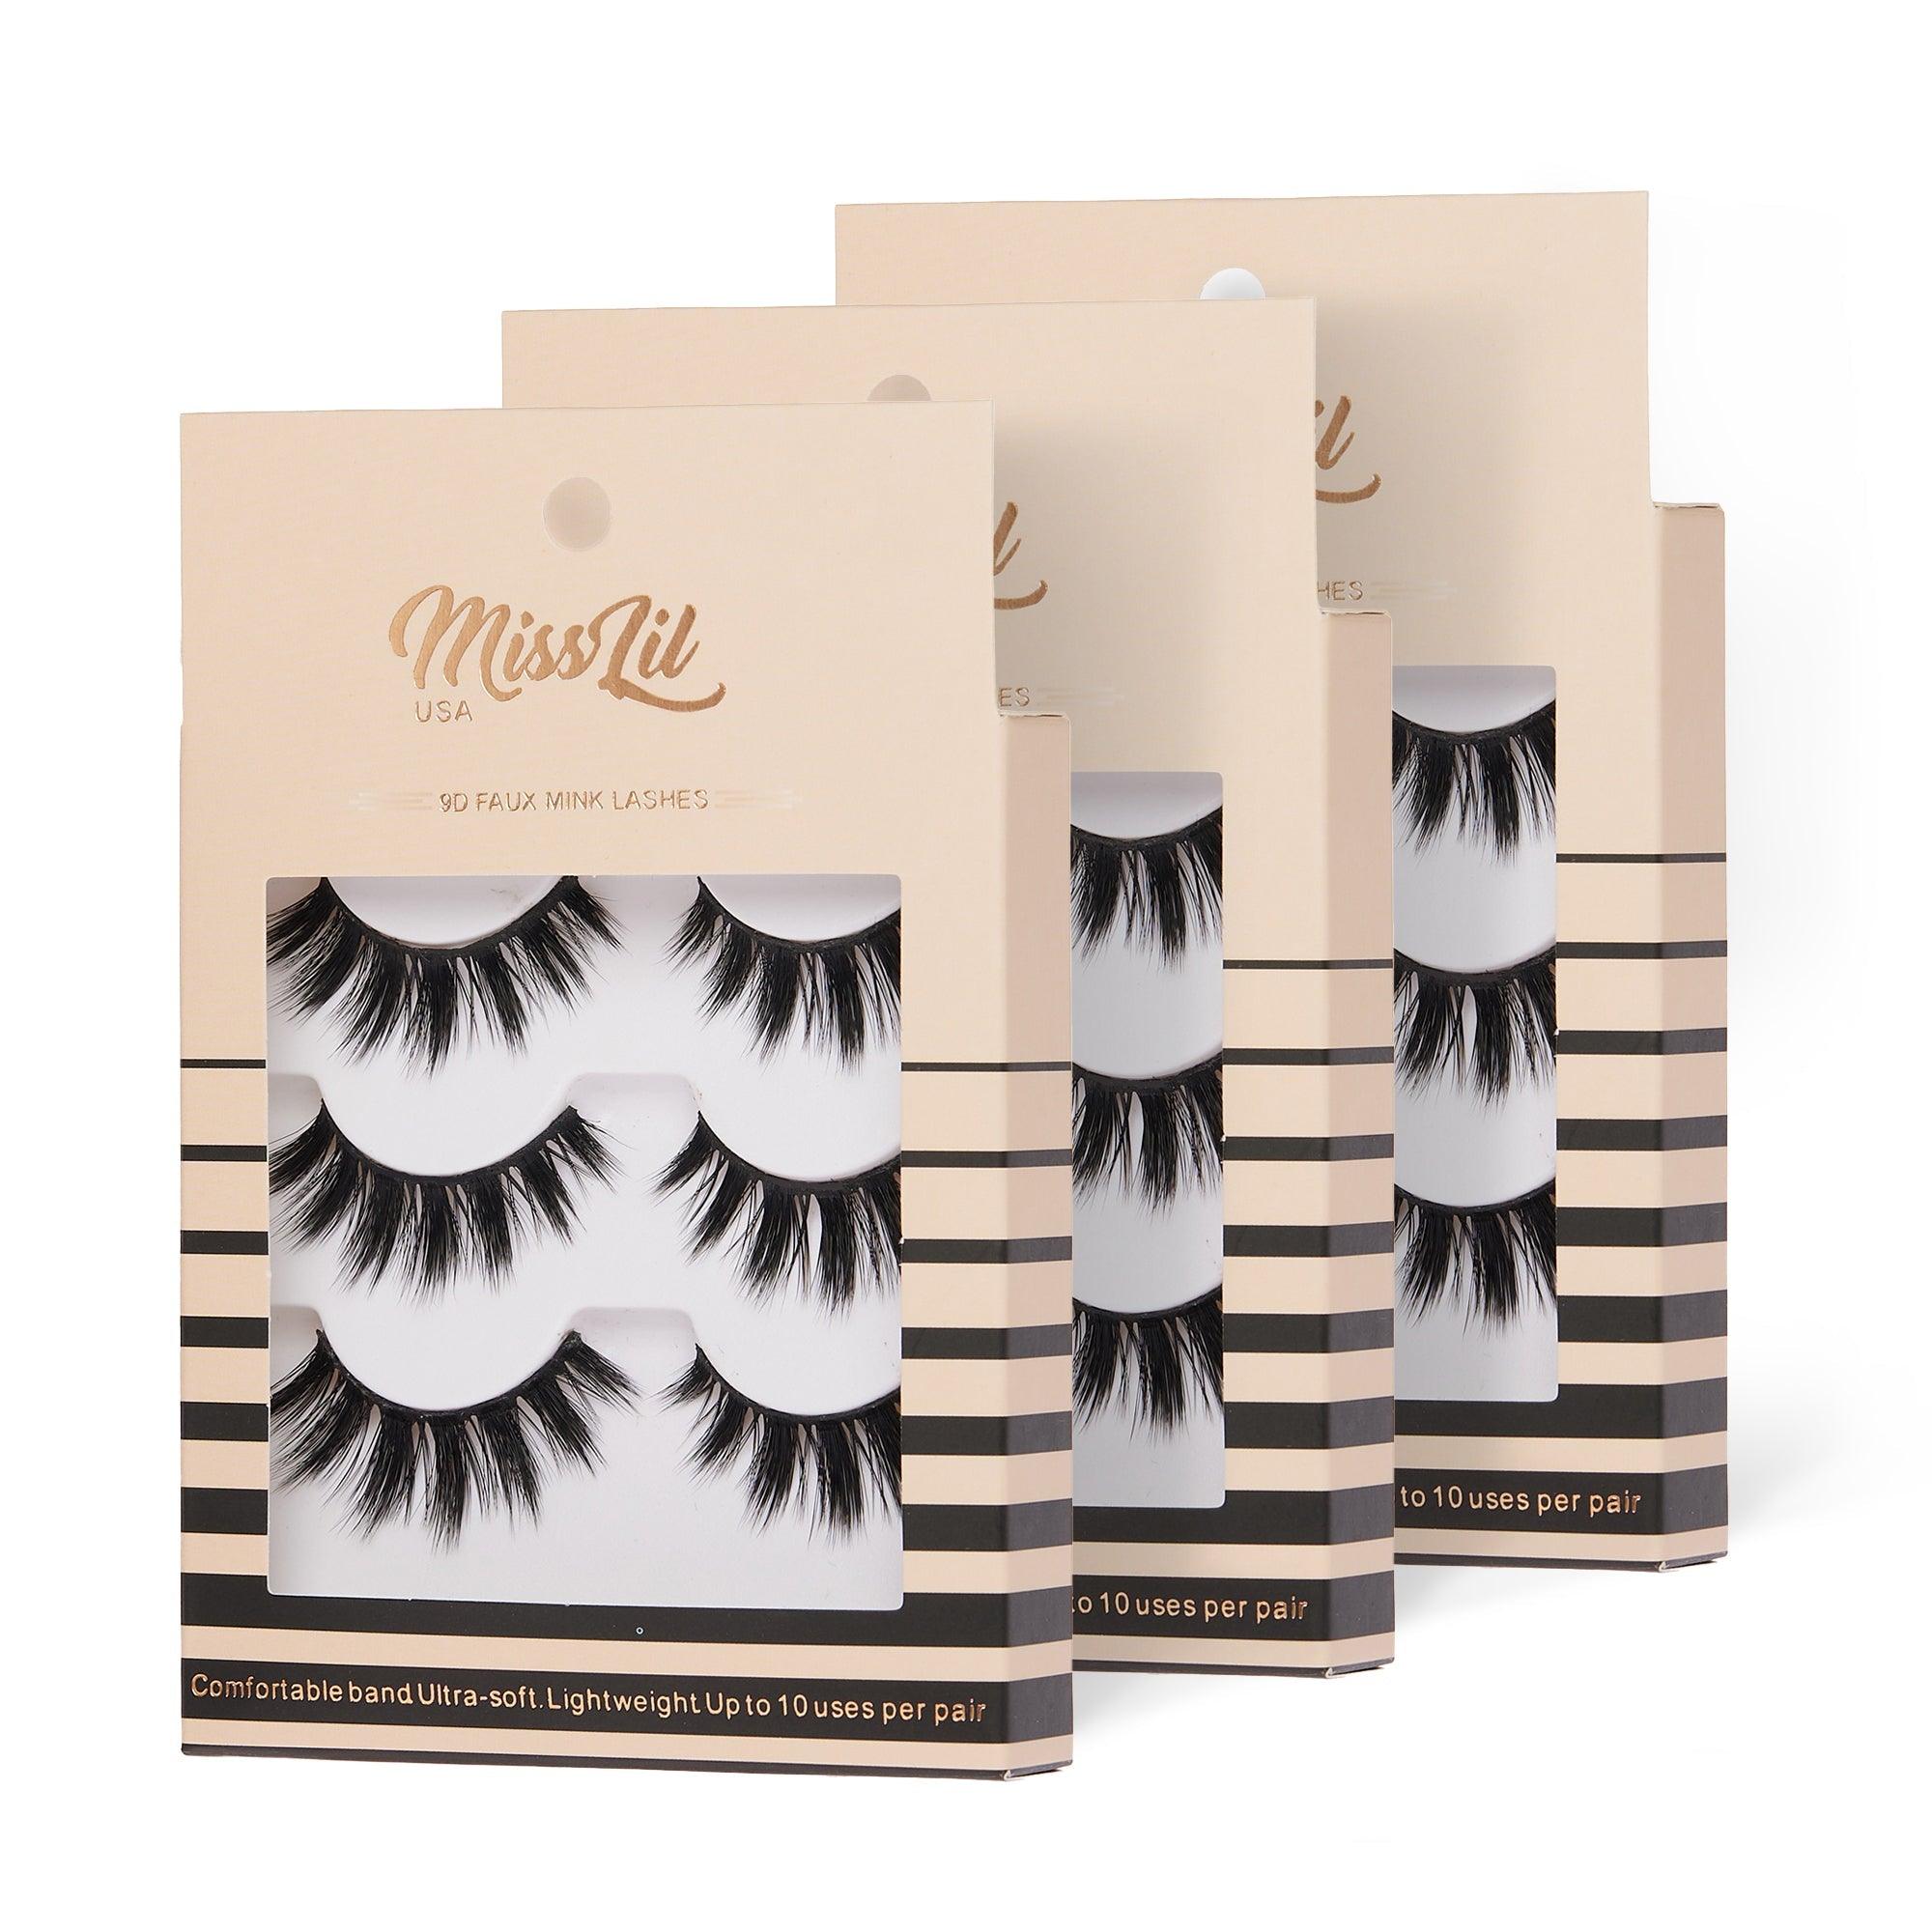 Copy of 3-Pair Faux 9D Mink Eyelashes - Luxury Collection #12 - Pack of 12 - Miss Lil USA